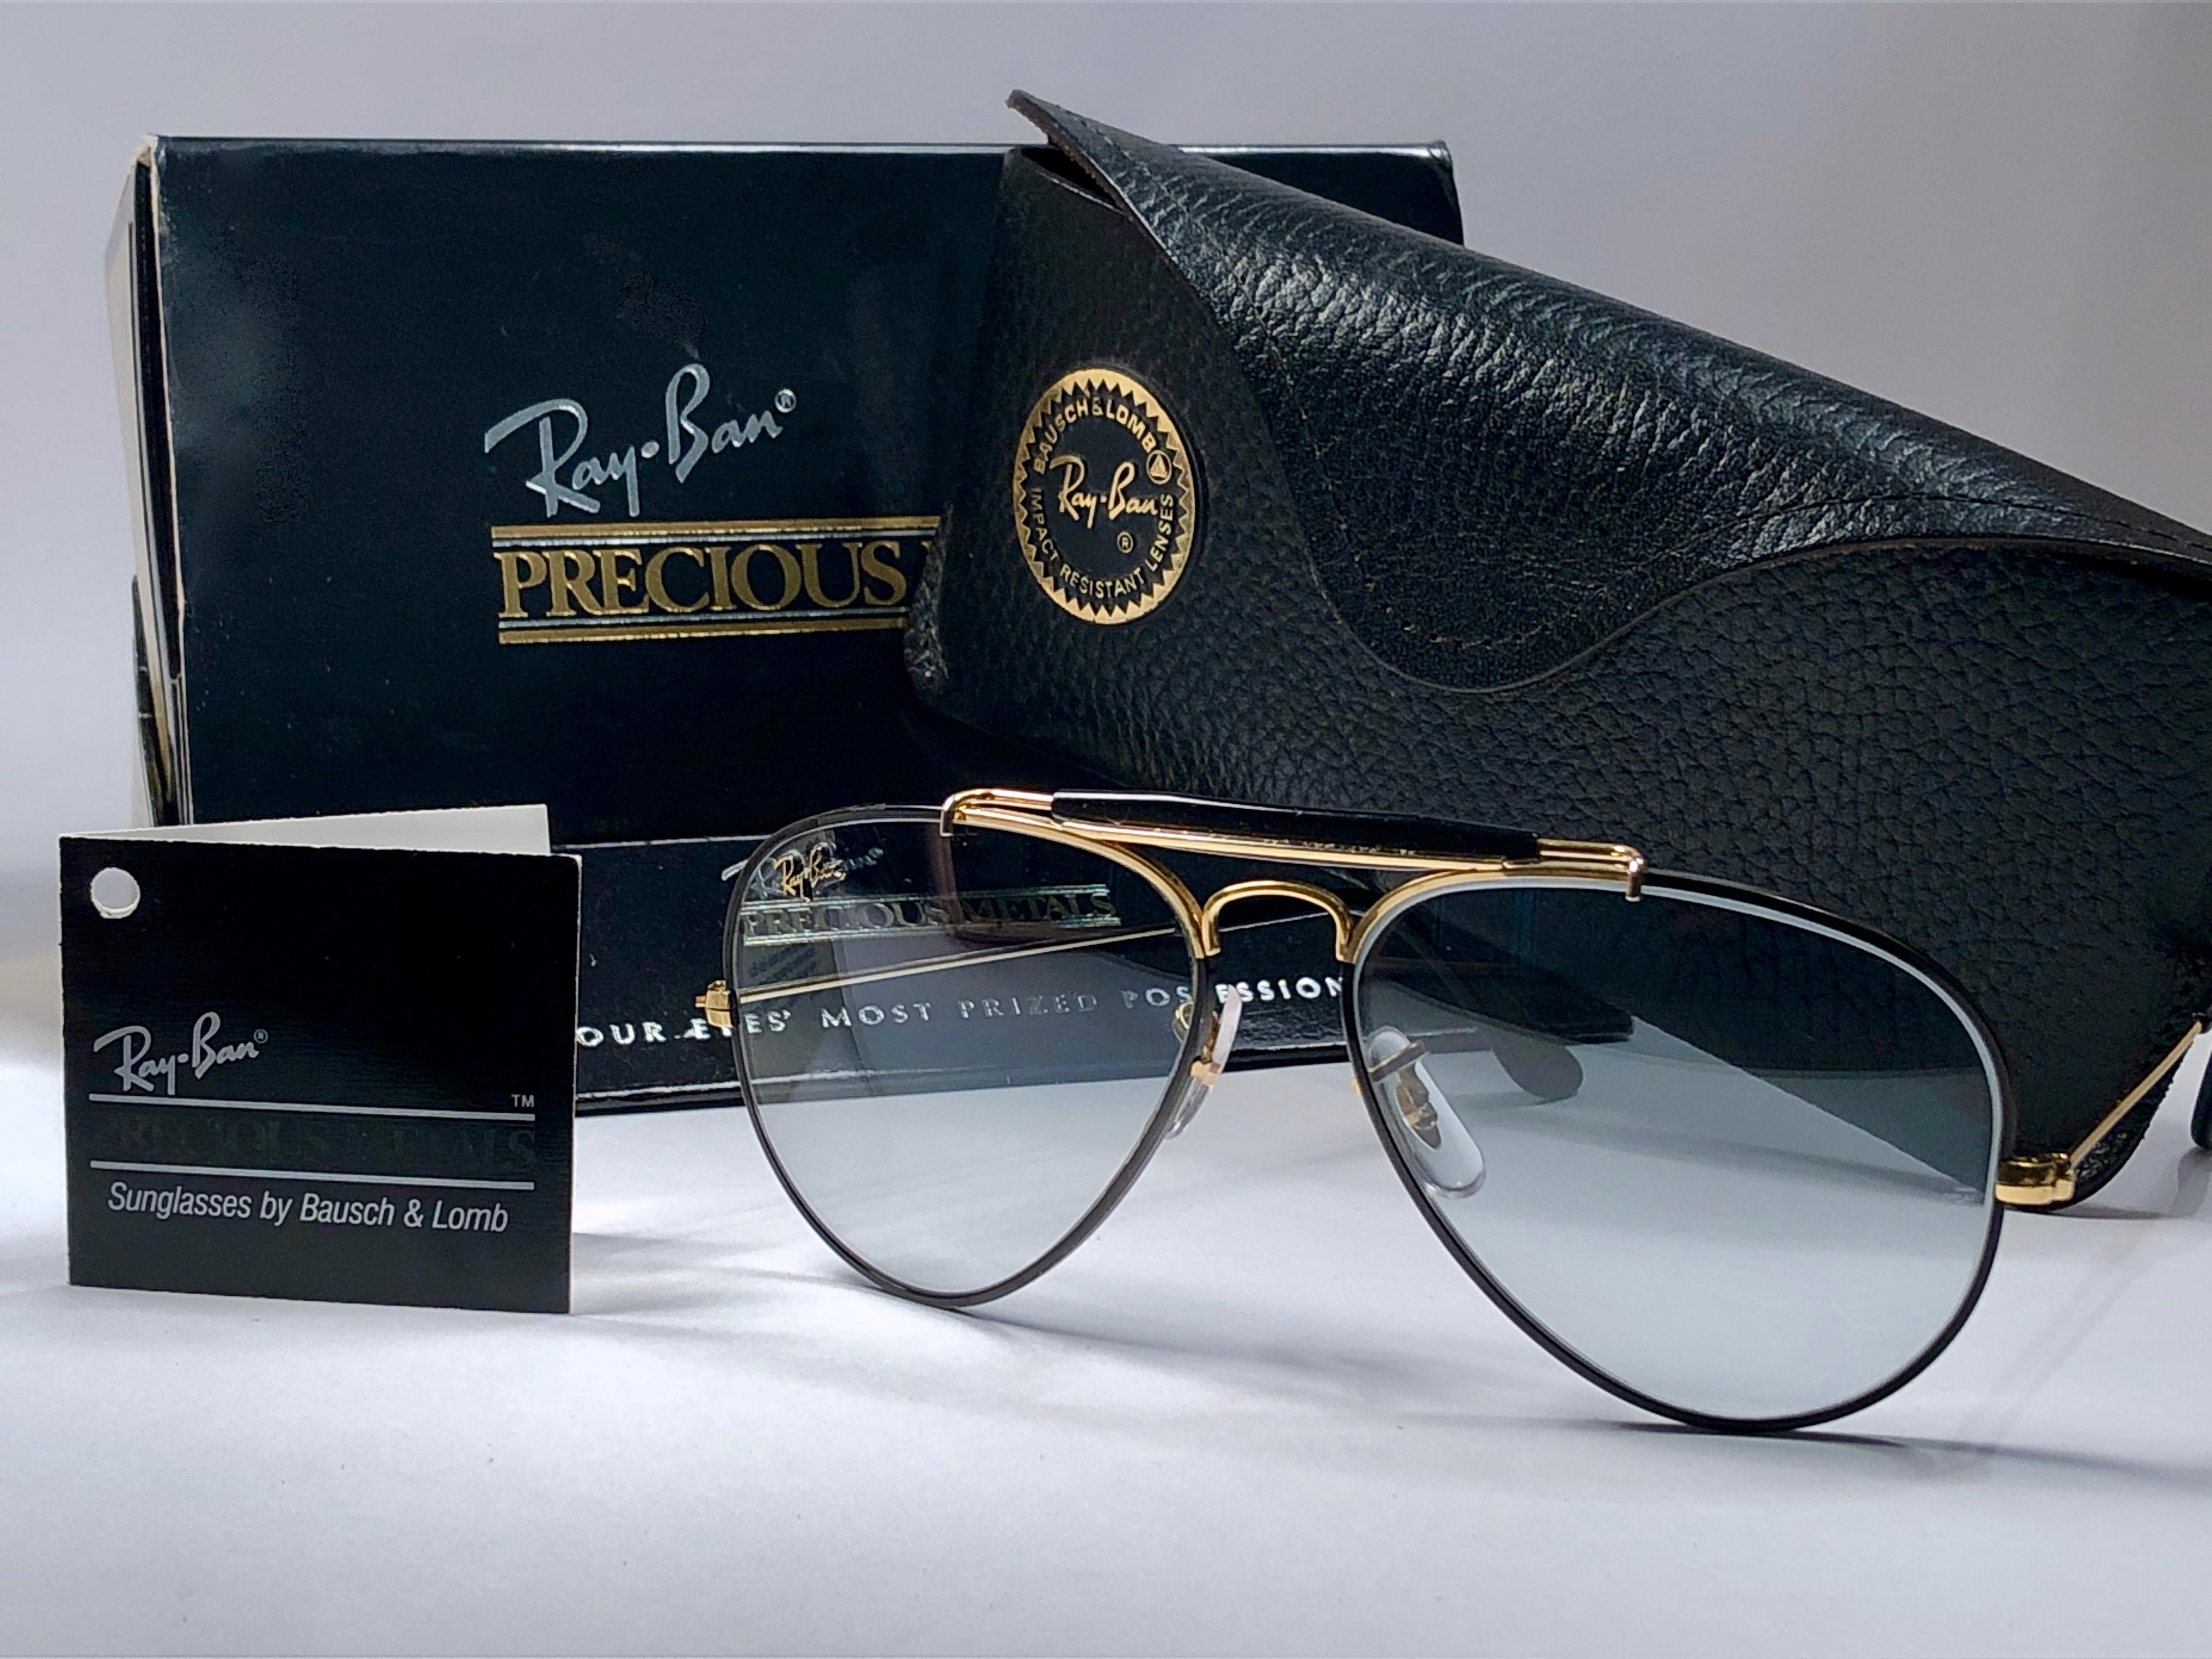 Collectors Item Precious Metals Outdoorsman in 62mm with original case. Full set.  Frame is 24 k gold plated and black coating.  The lenses are amazing blue changeable with a gradient and slight mirror. Ray Ban logo is on top of the right lens in